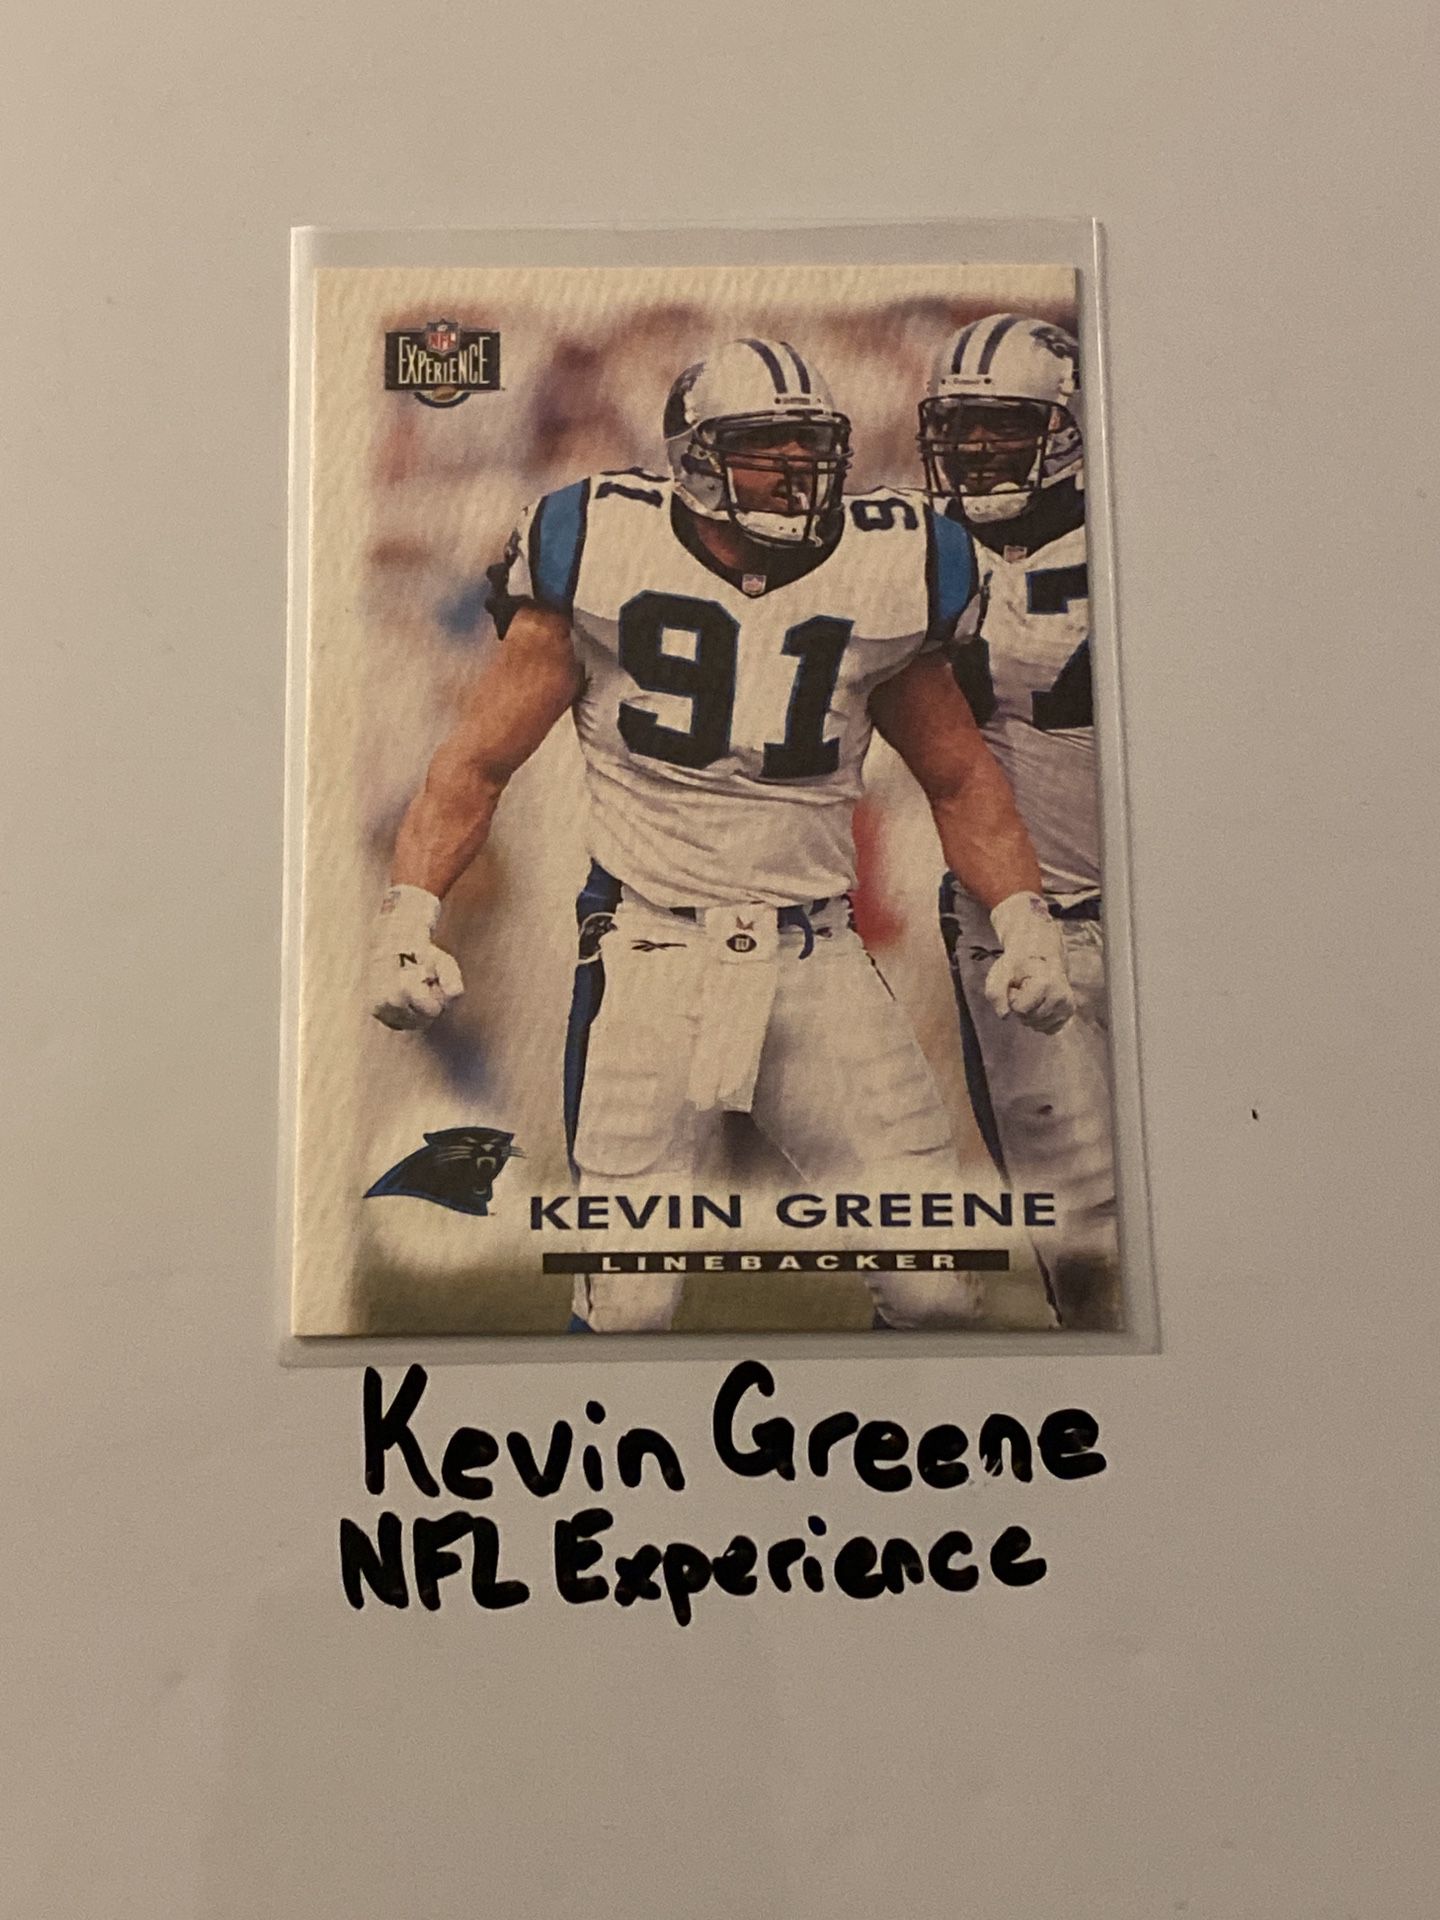 Kevin Greene Carolina Panthers Hall of Fame LB NFL Experience Card. 